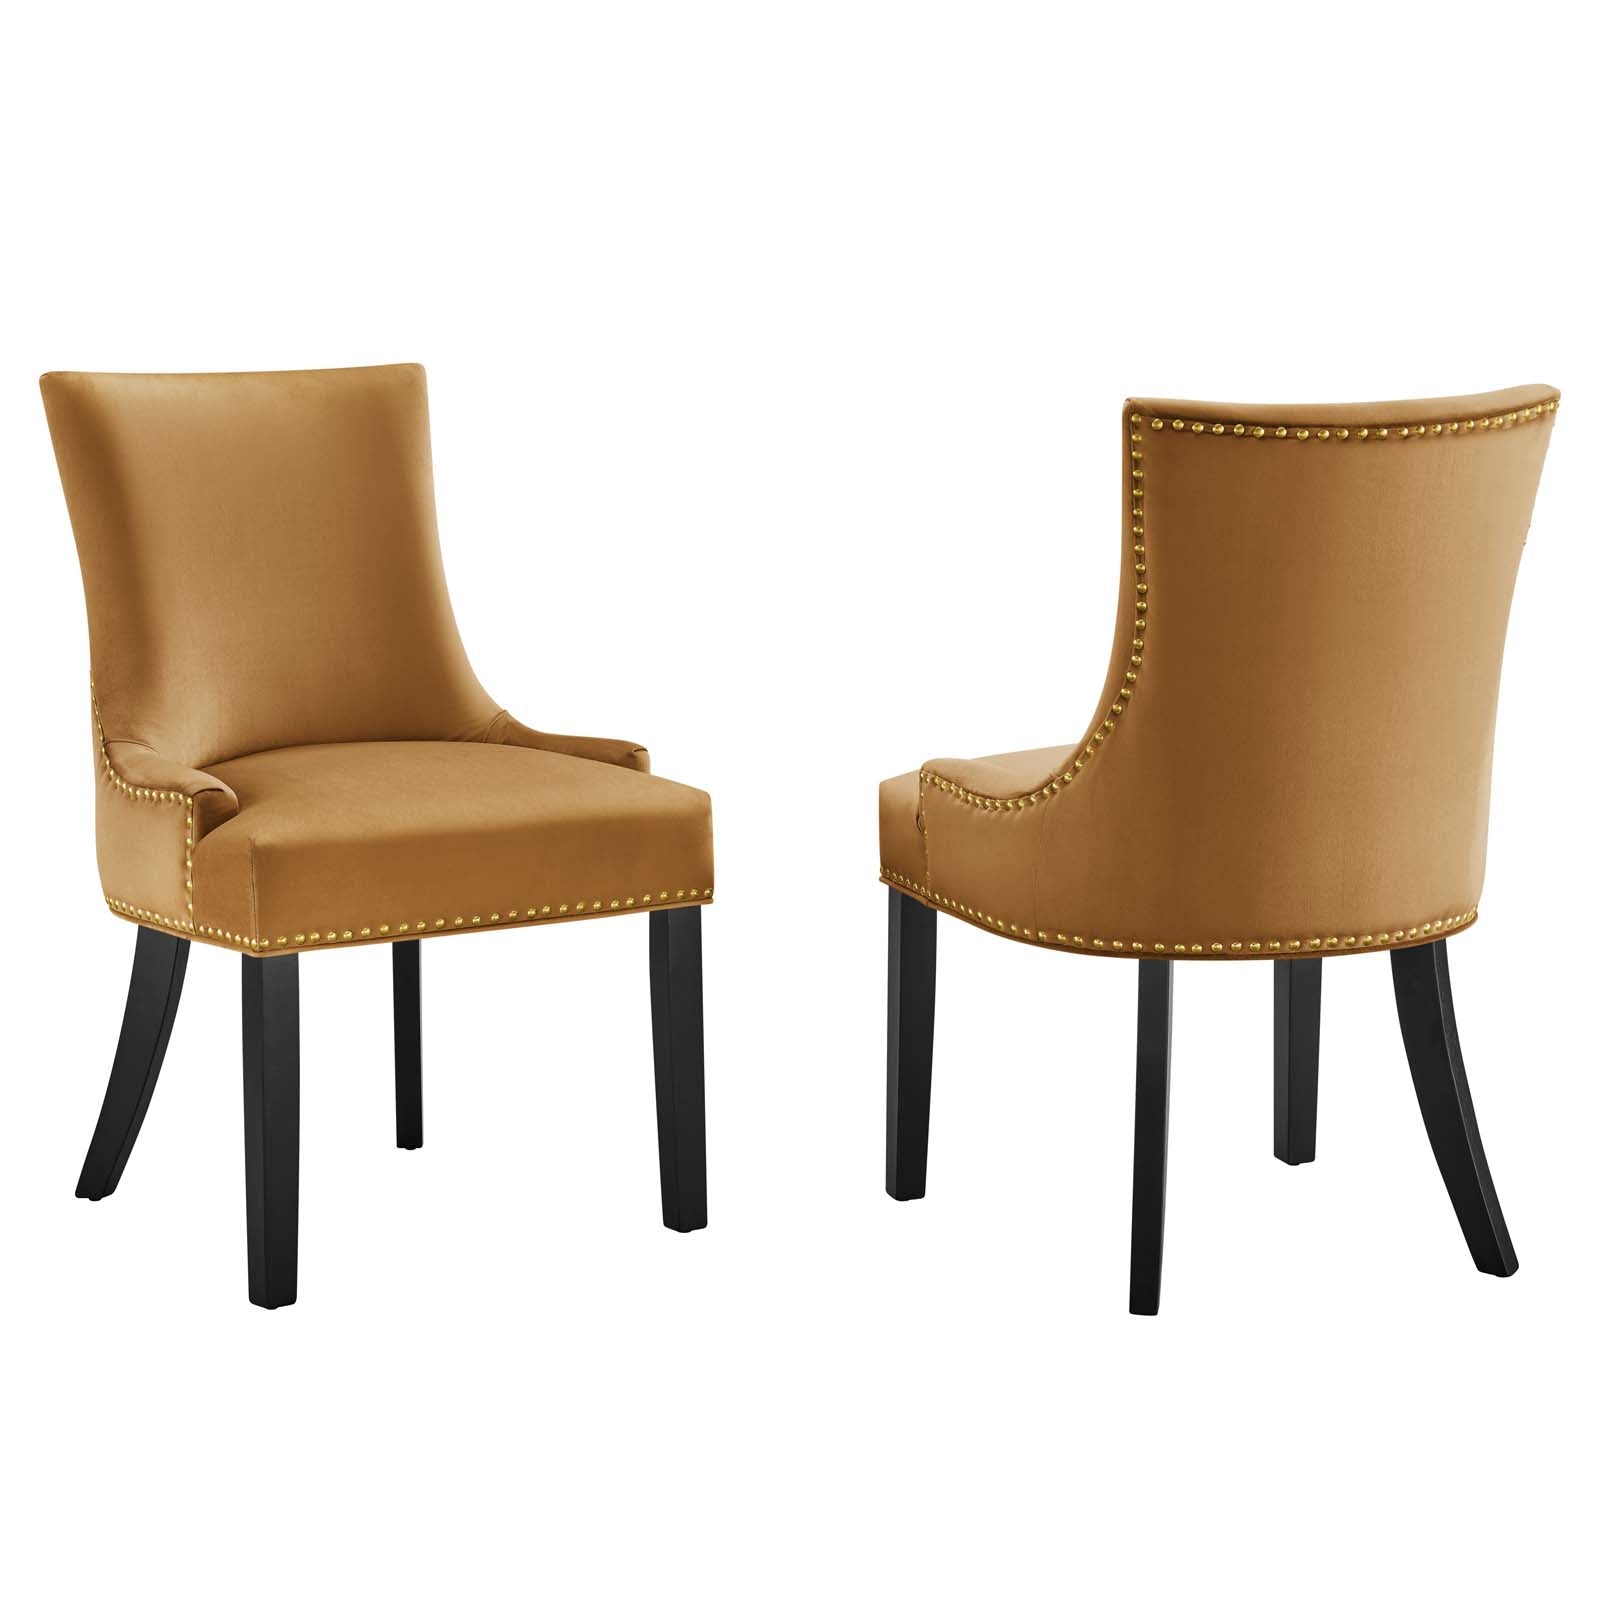 Modway Dining Chairs - Marquis Performance Velvet Dining Chairs - Set of 2 Cognac